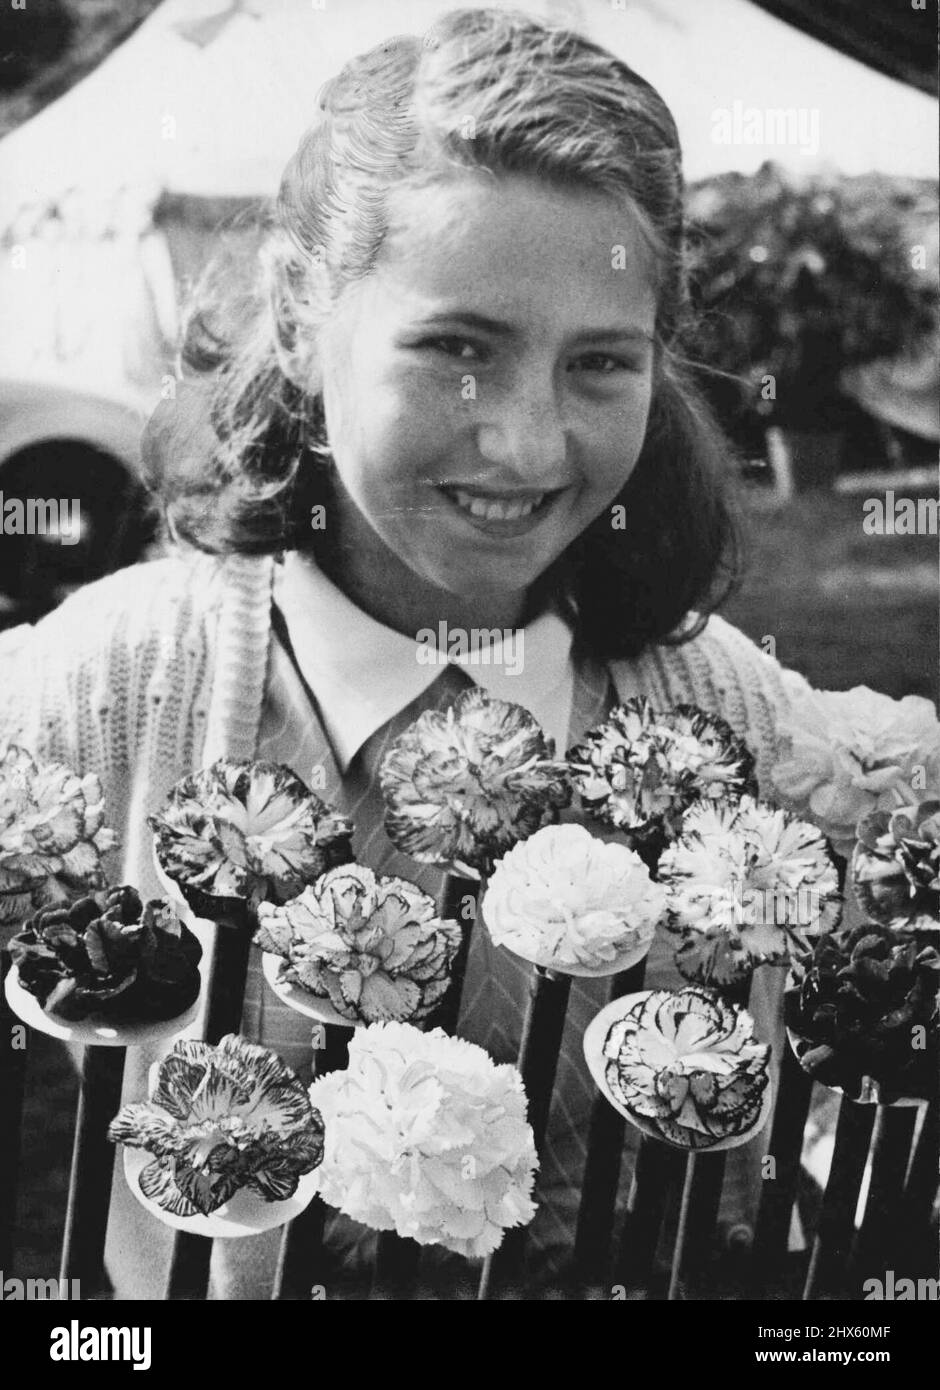 Colorful Carnations. Striking a colorful pose with a tray of carnations at the Chelsea Flower Show in the Domain is Joan Parry, 13. The blooms were grown by Mr. W. Grainger, of Mascot. September 19, 1946. Stock Photo